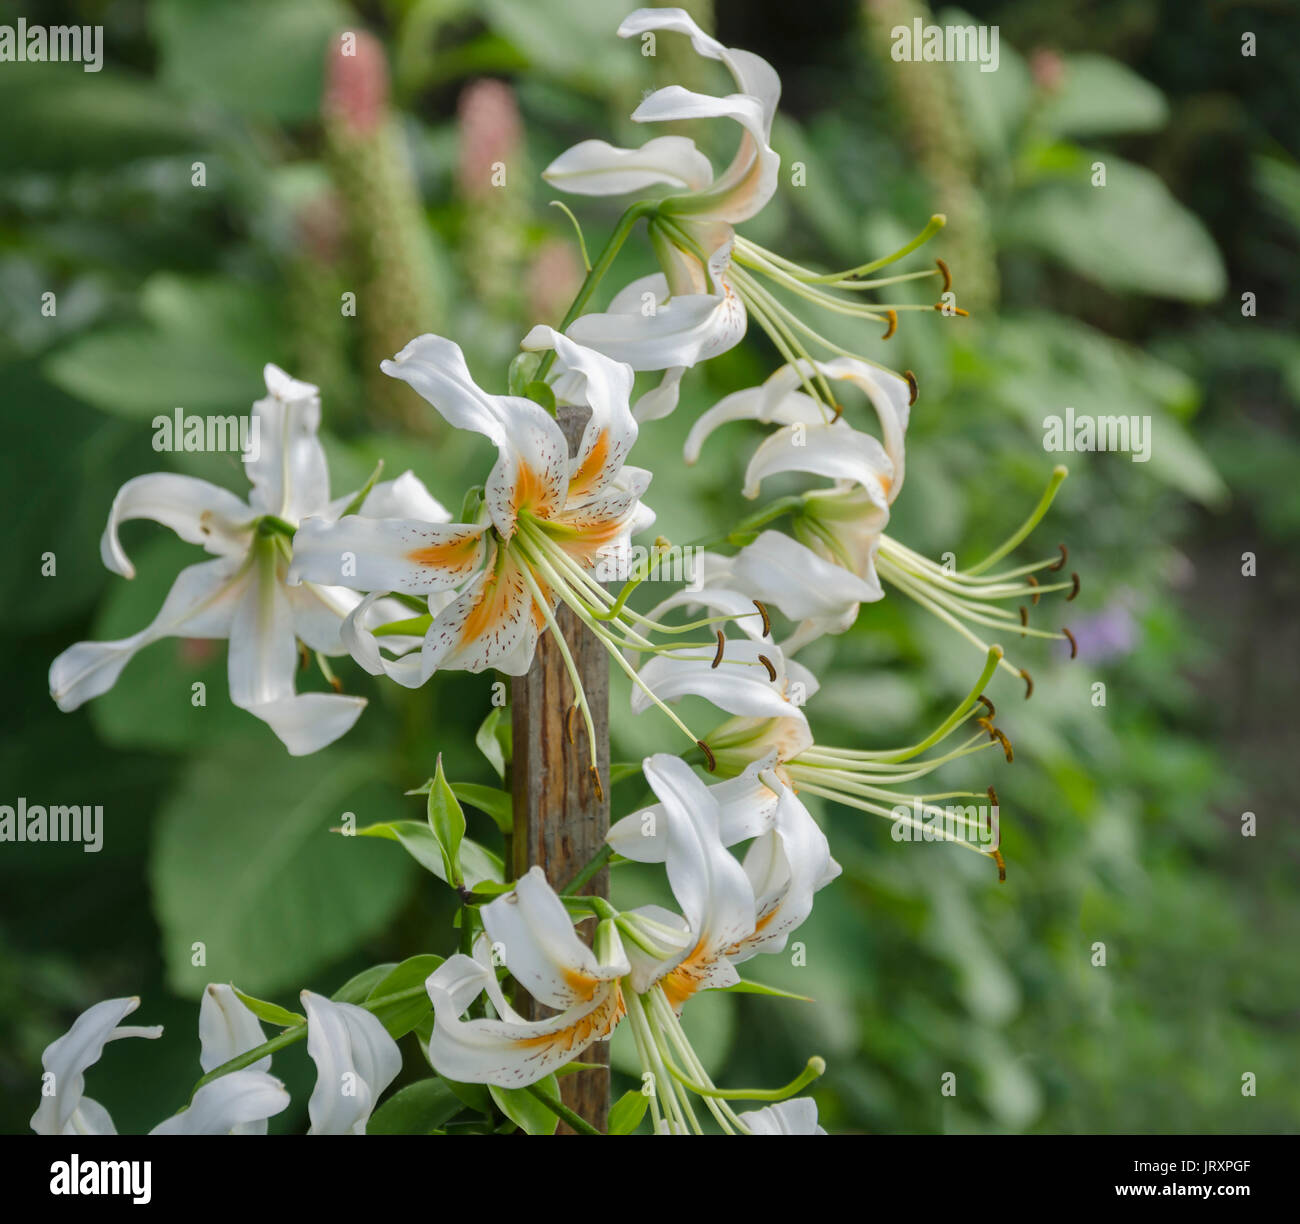 Summer in the garden beautiful flowers of fragrant white lily, on the background of green leaves Stock Photo